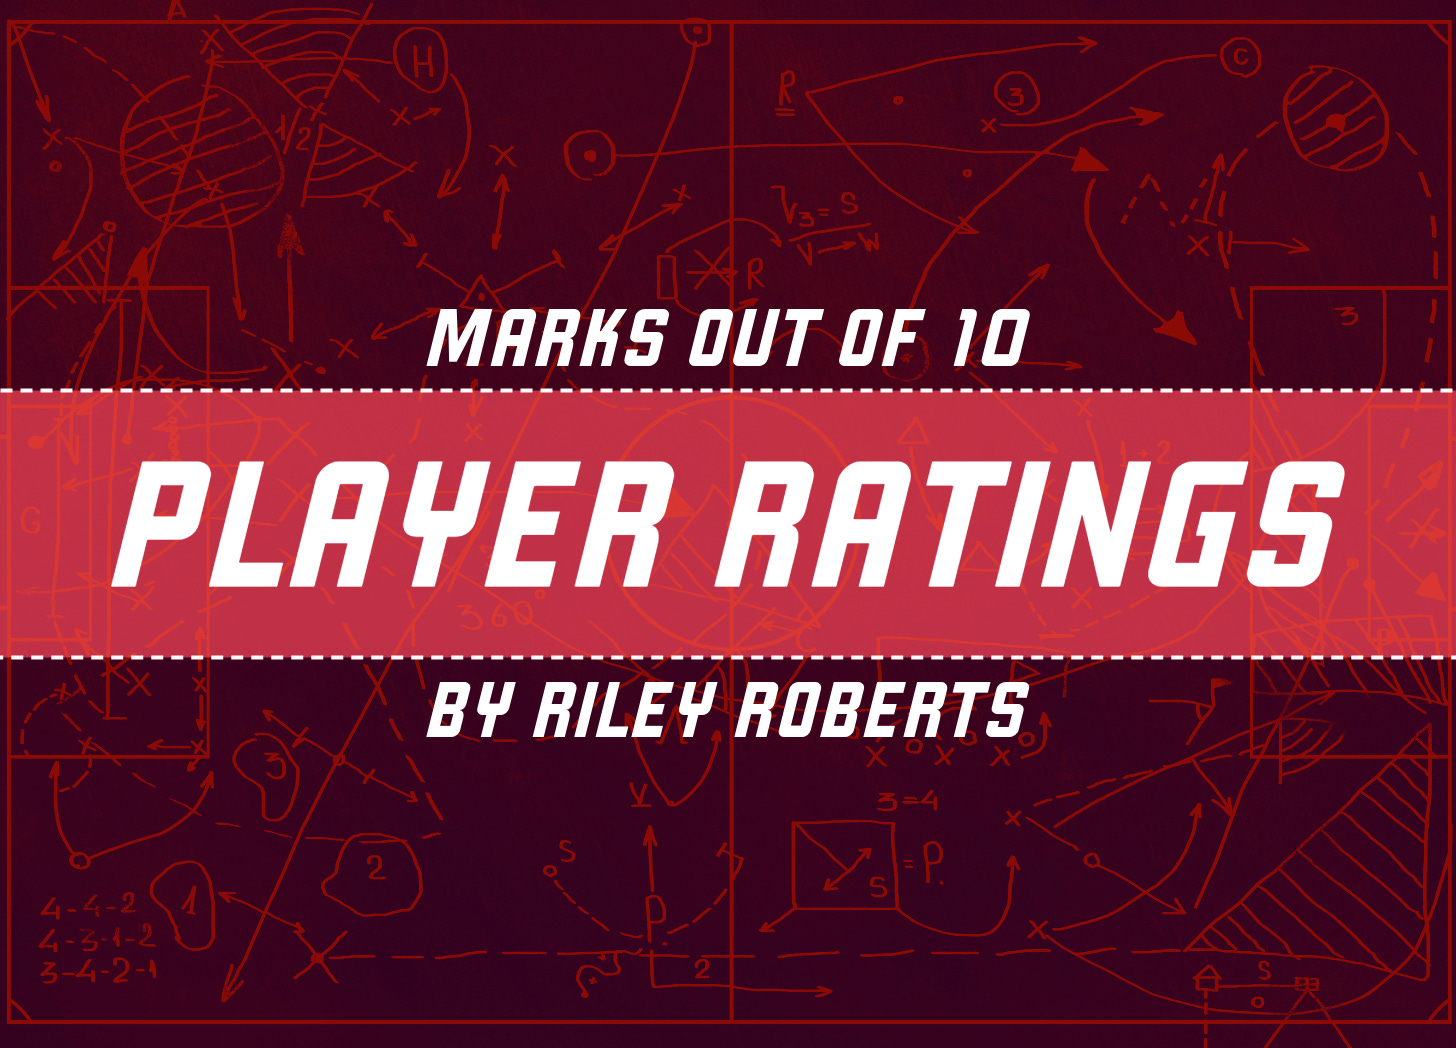 PLAYER RATINGS BY THE PINCH